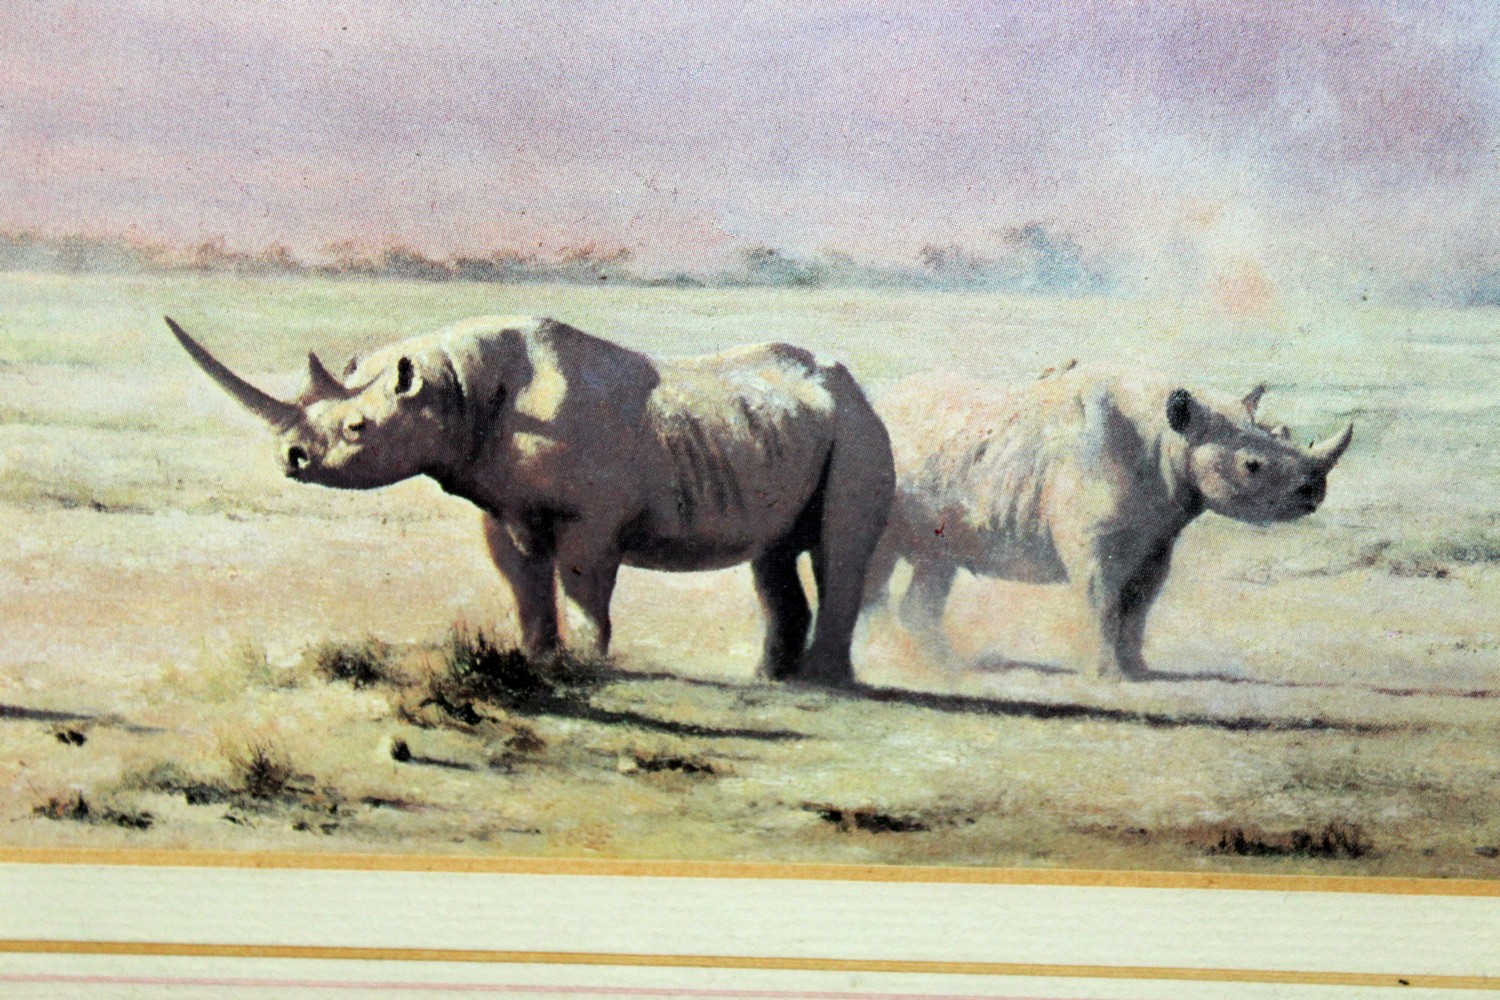 David Shepherd, a colour print of a rhinoceros, pencil signed. - Image 2 of 3